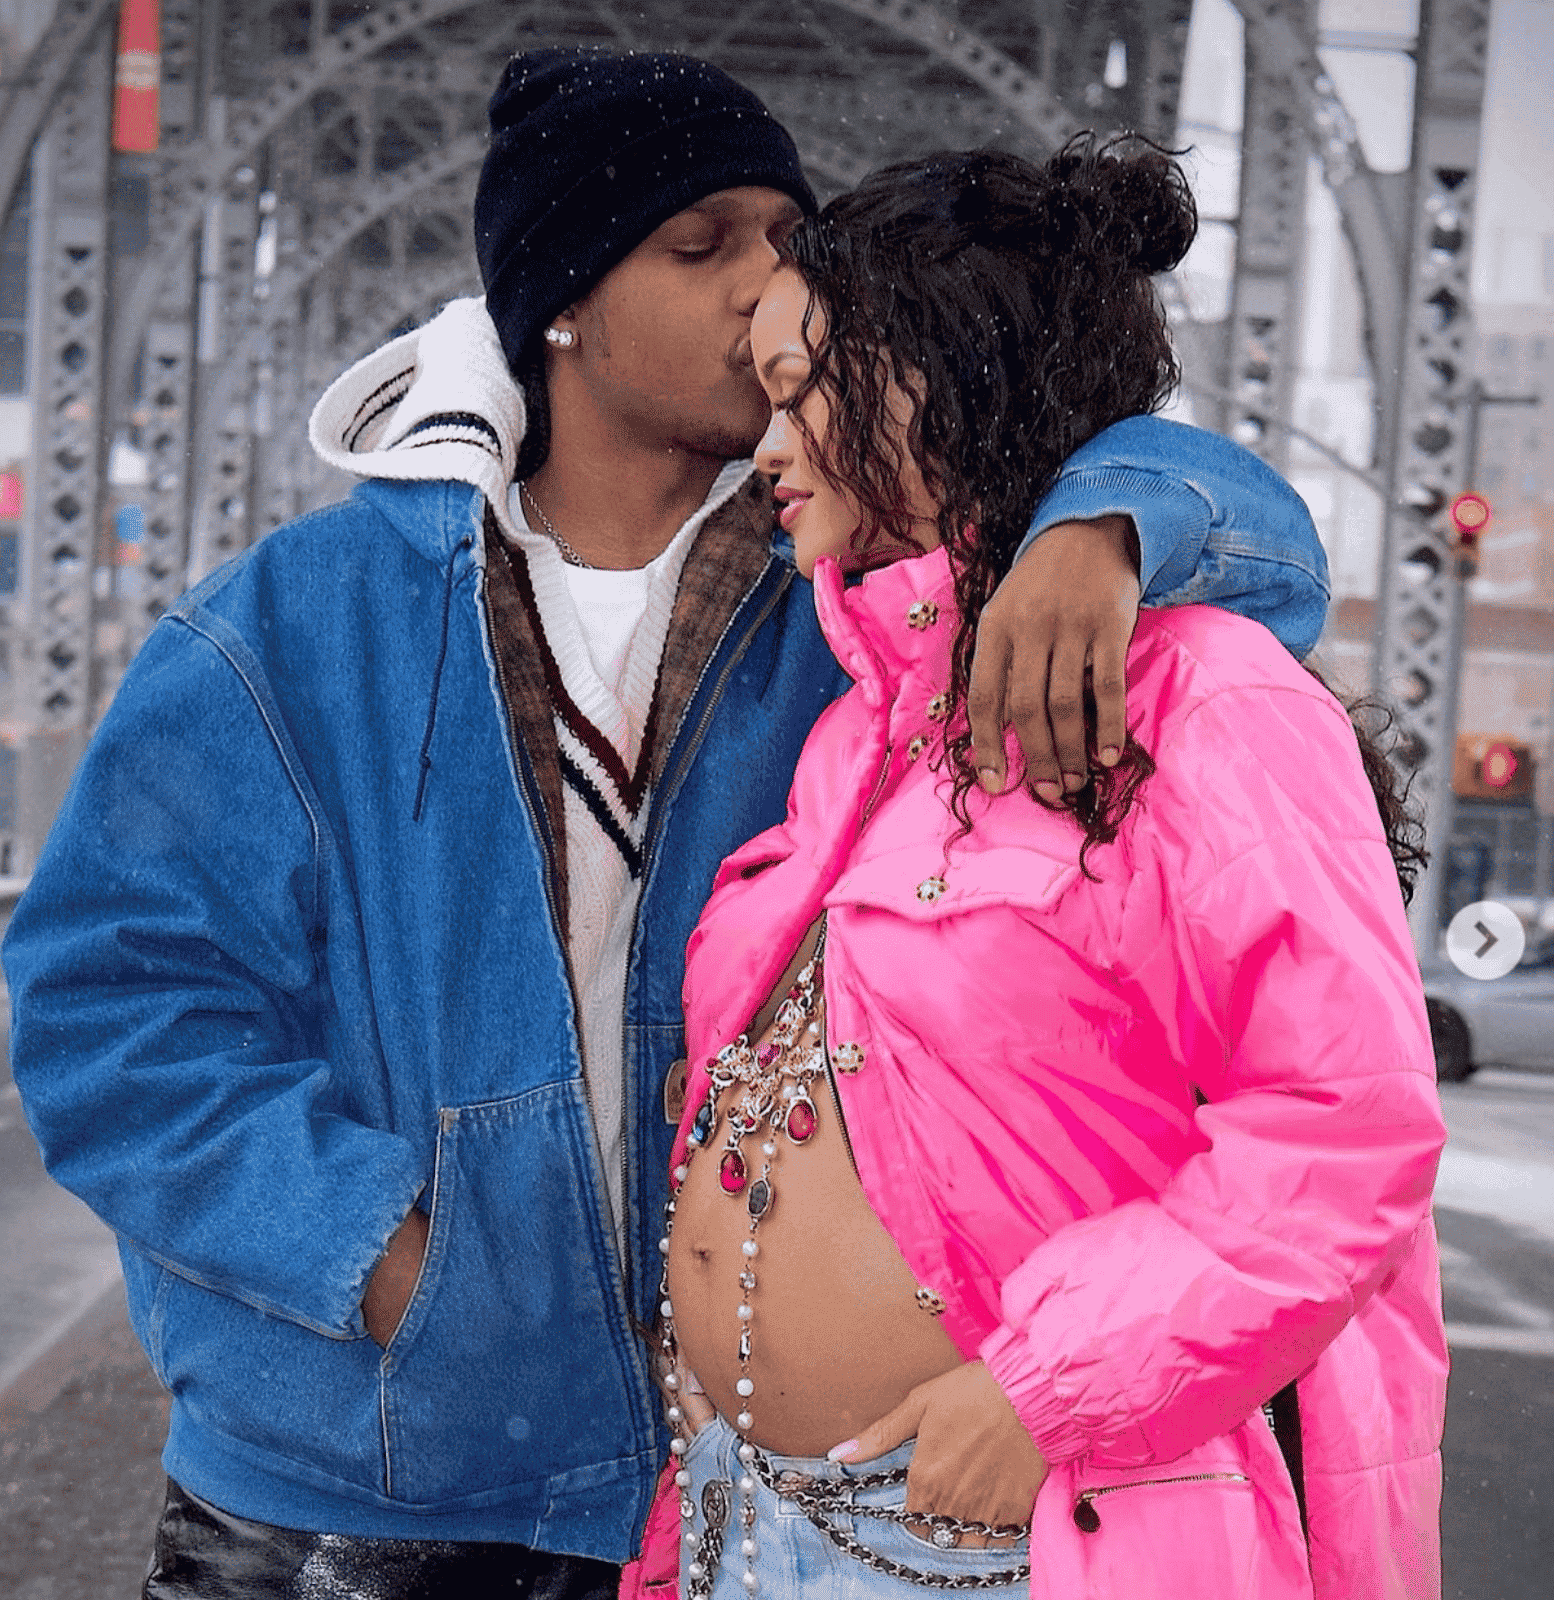 Rihanna Reveals Her Pregnancy in This ’90s Pink Chanel Puffer Coat